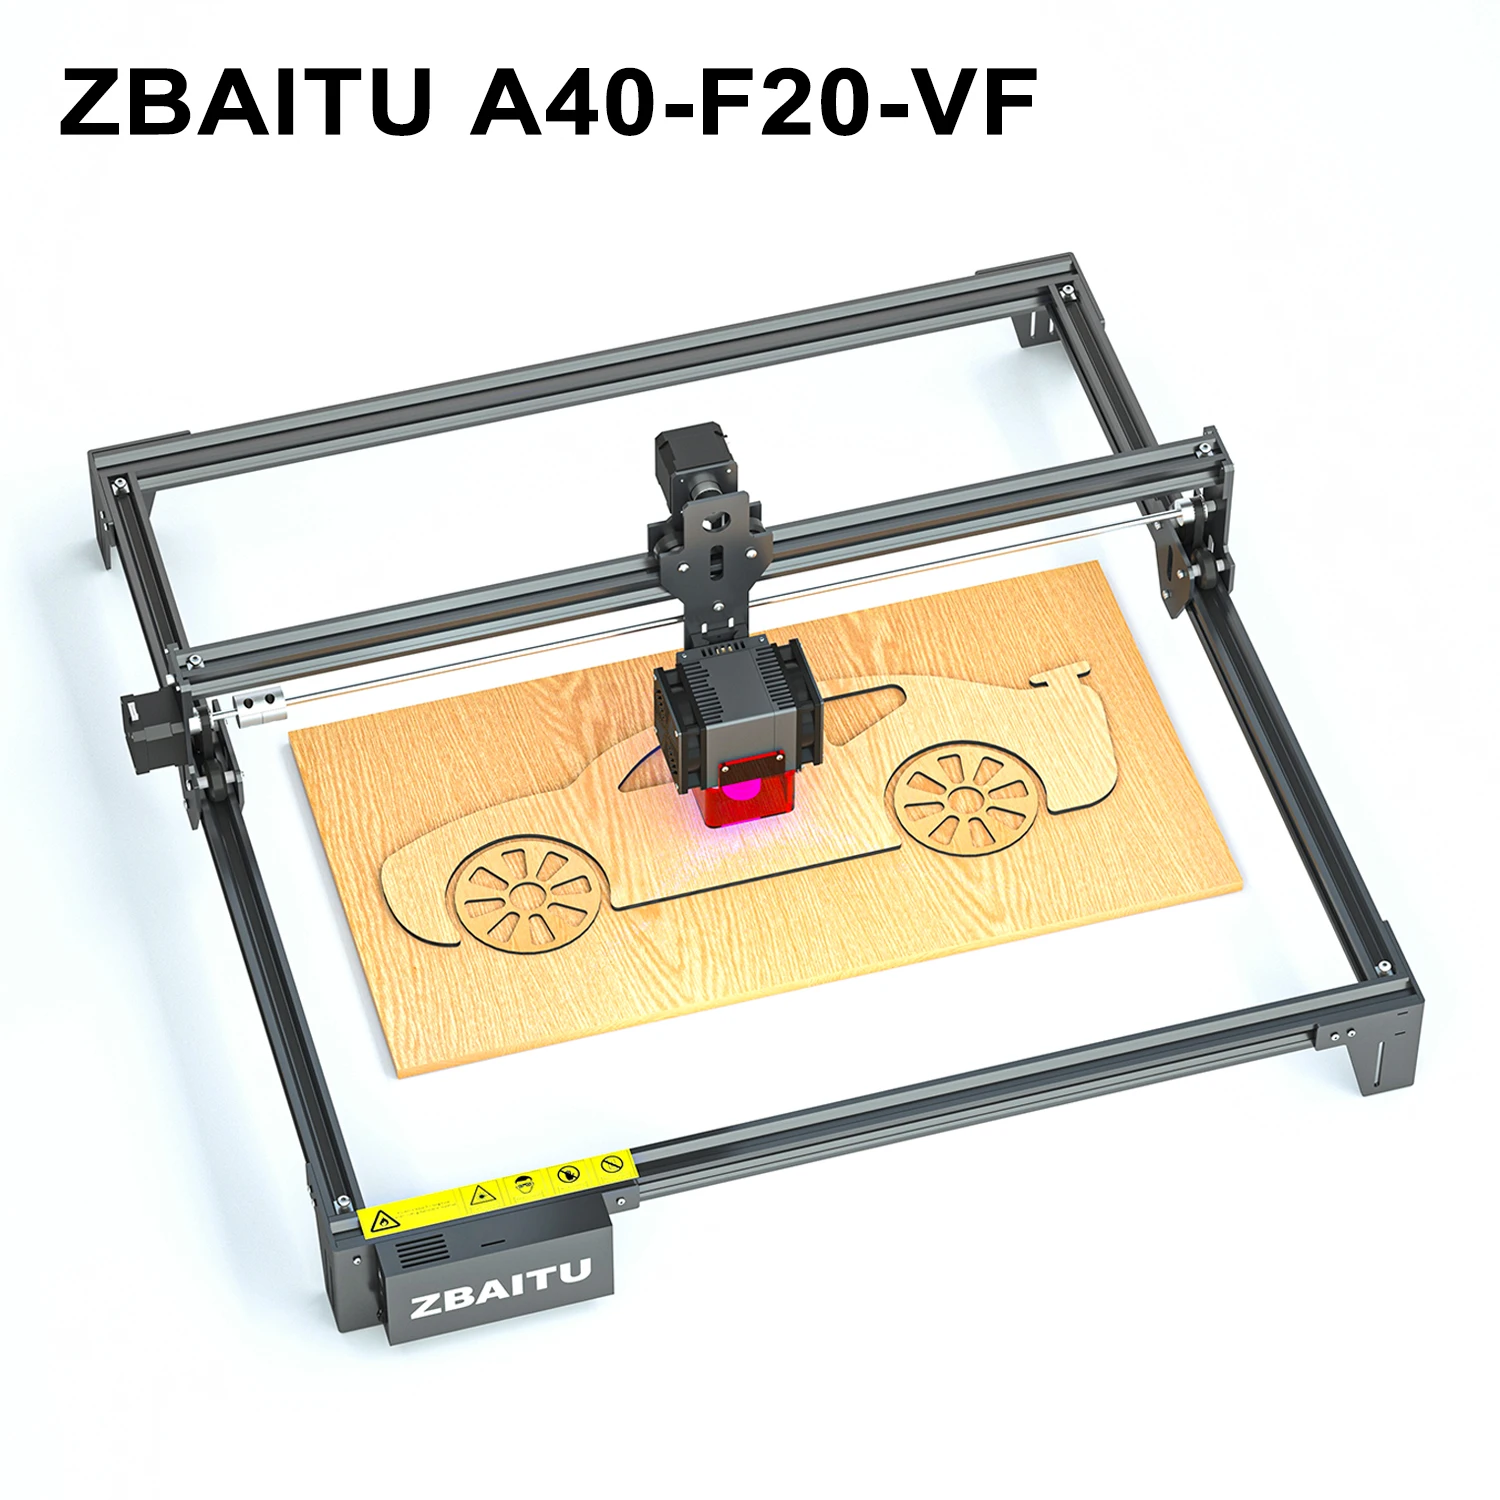 

ZBAITU 40x40cm Laser Engraver Machine CNC Router With 40W/80W/100W Air Assisted 3D Wood Router Engraving and Cutting Machine